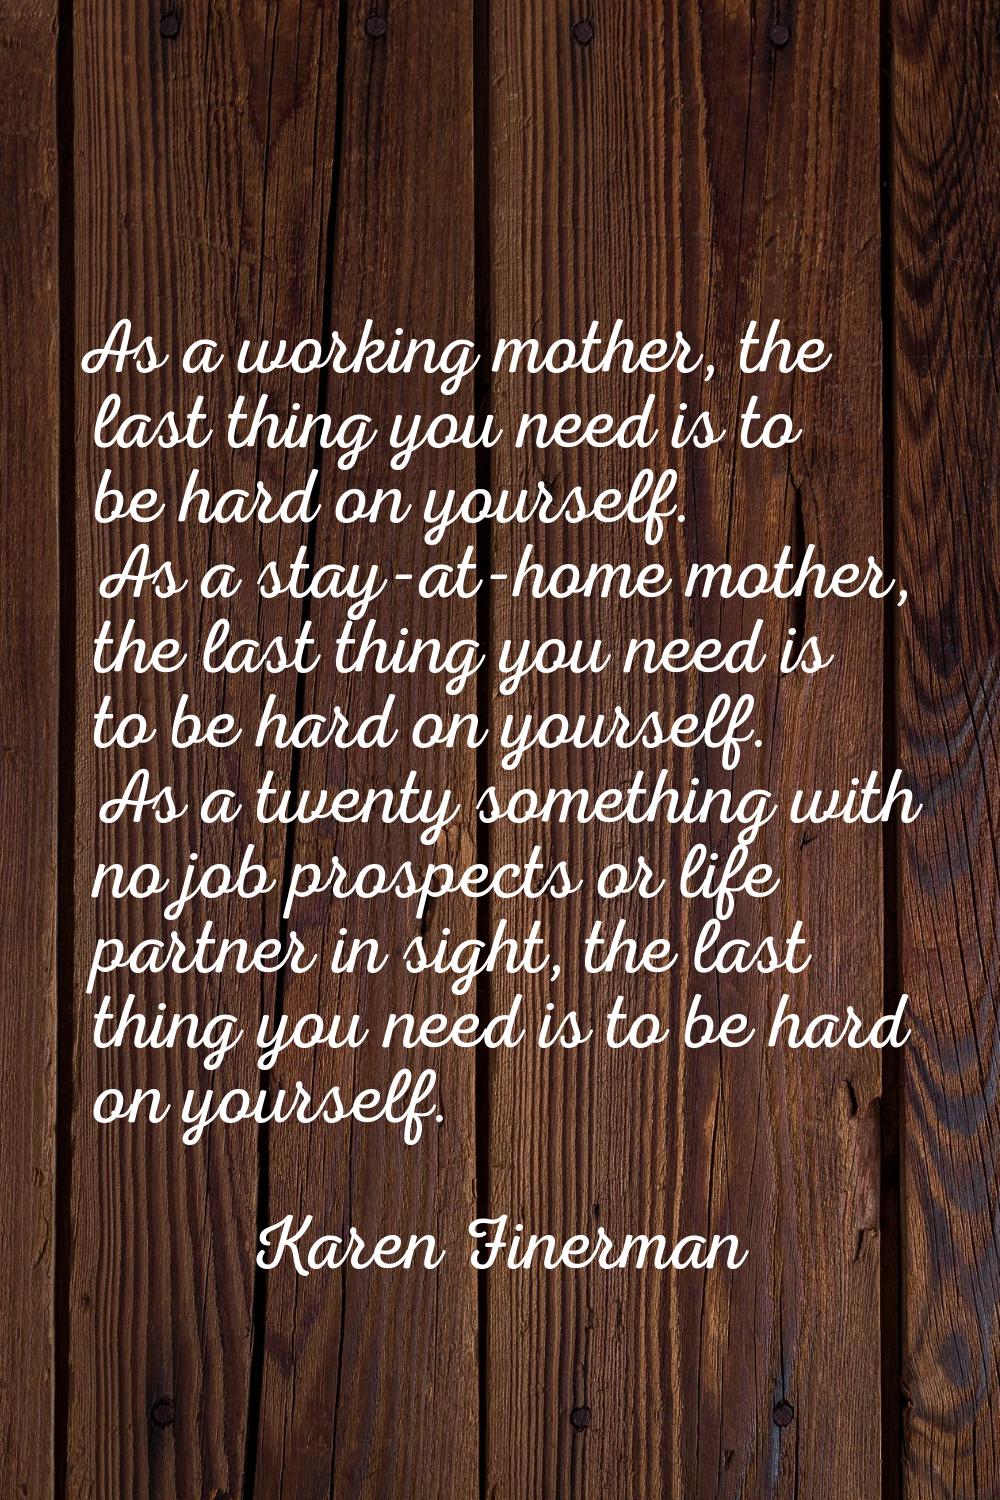 As a working mother, the last thing you need is to be hard on yourself. As a stay-at-home mother, t